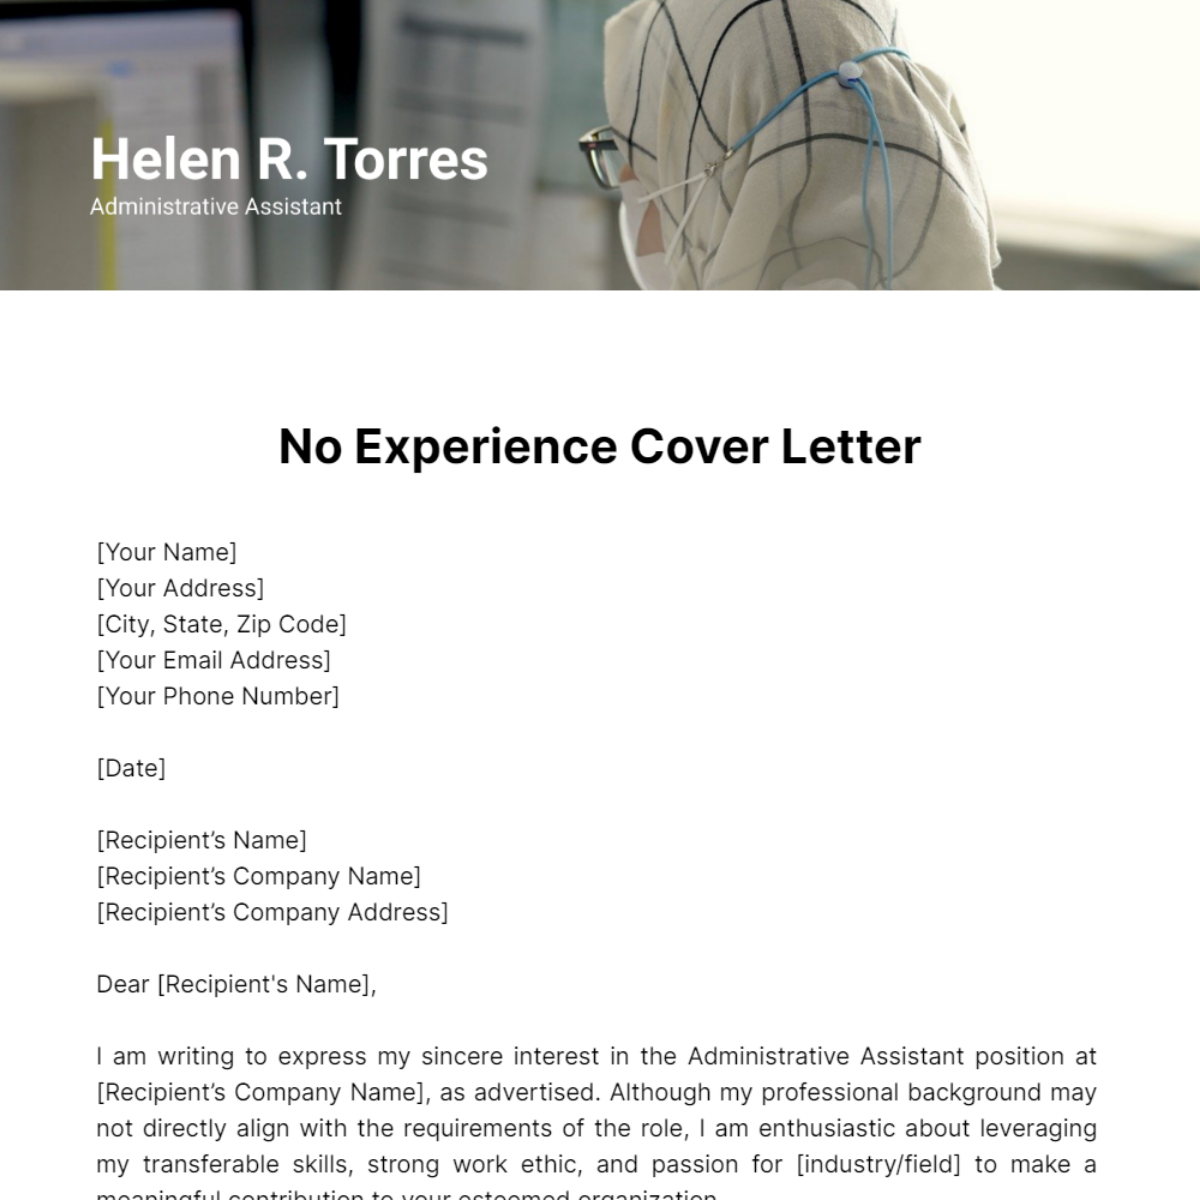 No Experience Cover Letter Template